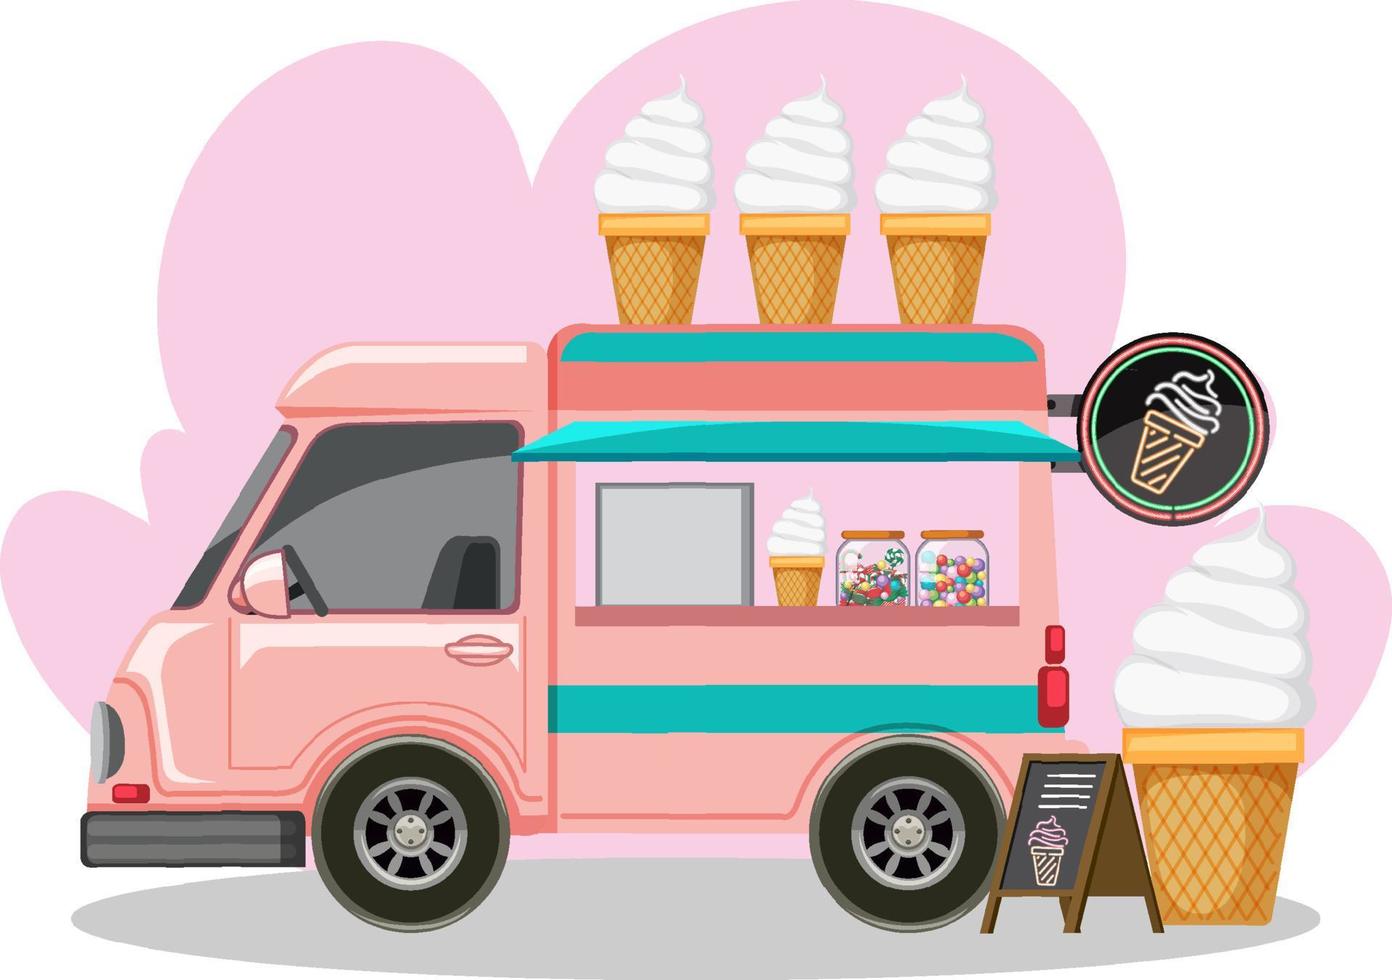 808 Ice Cream Truck Drawing Images, Stock Photos, 3D objects, & Vectors |  Shutterstock